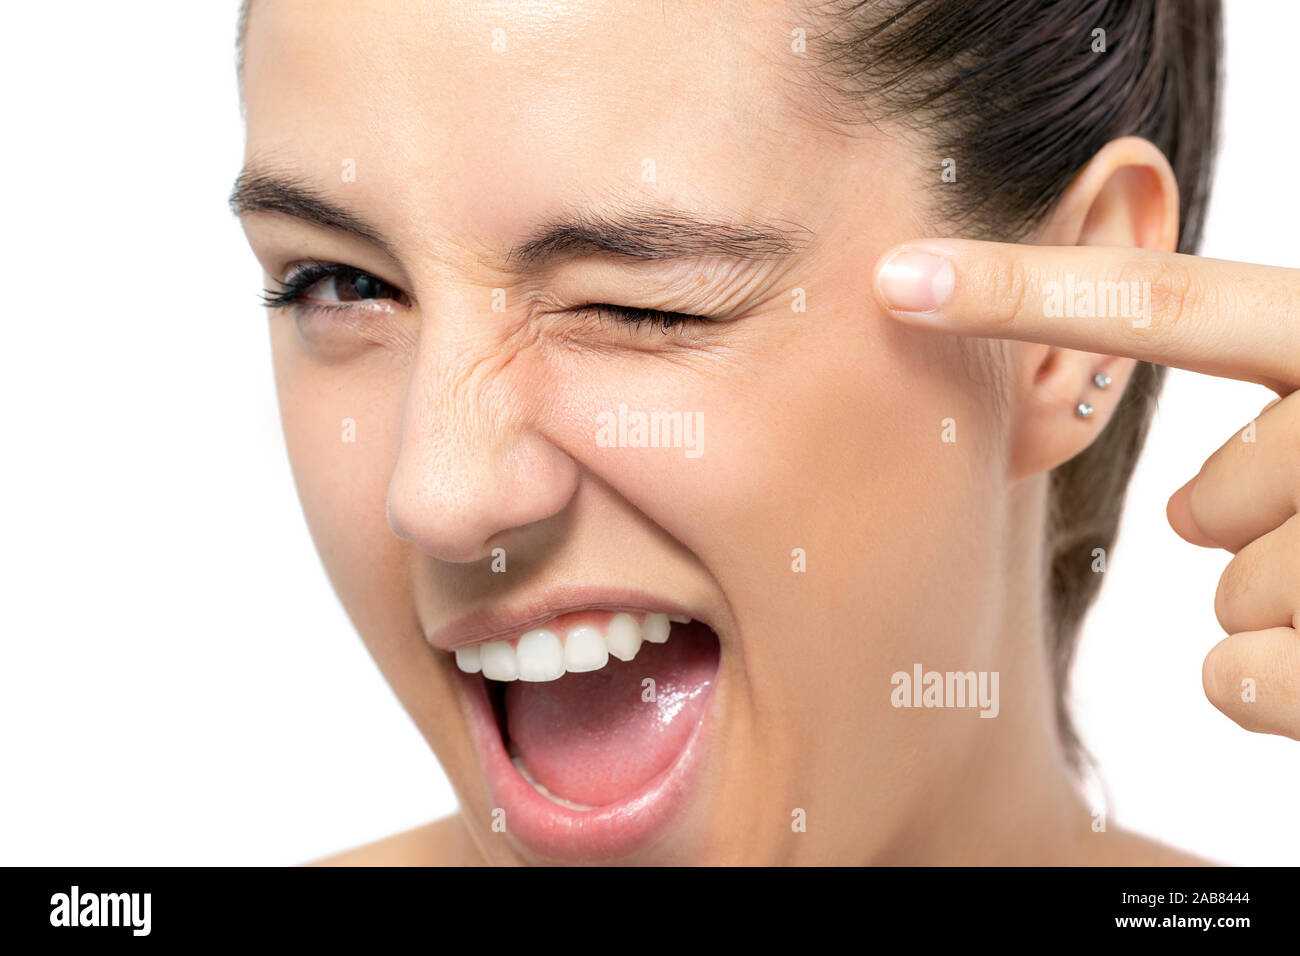 Close up fun portrait of woman pointing with finger at blinked eye.Isolated on white background. Stock Photo